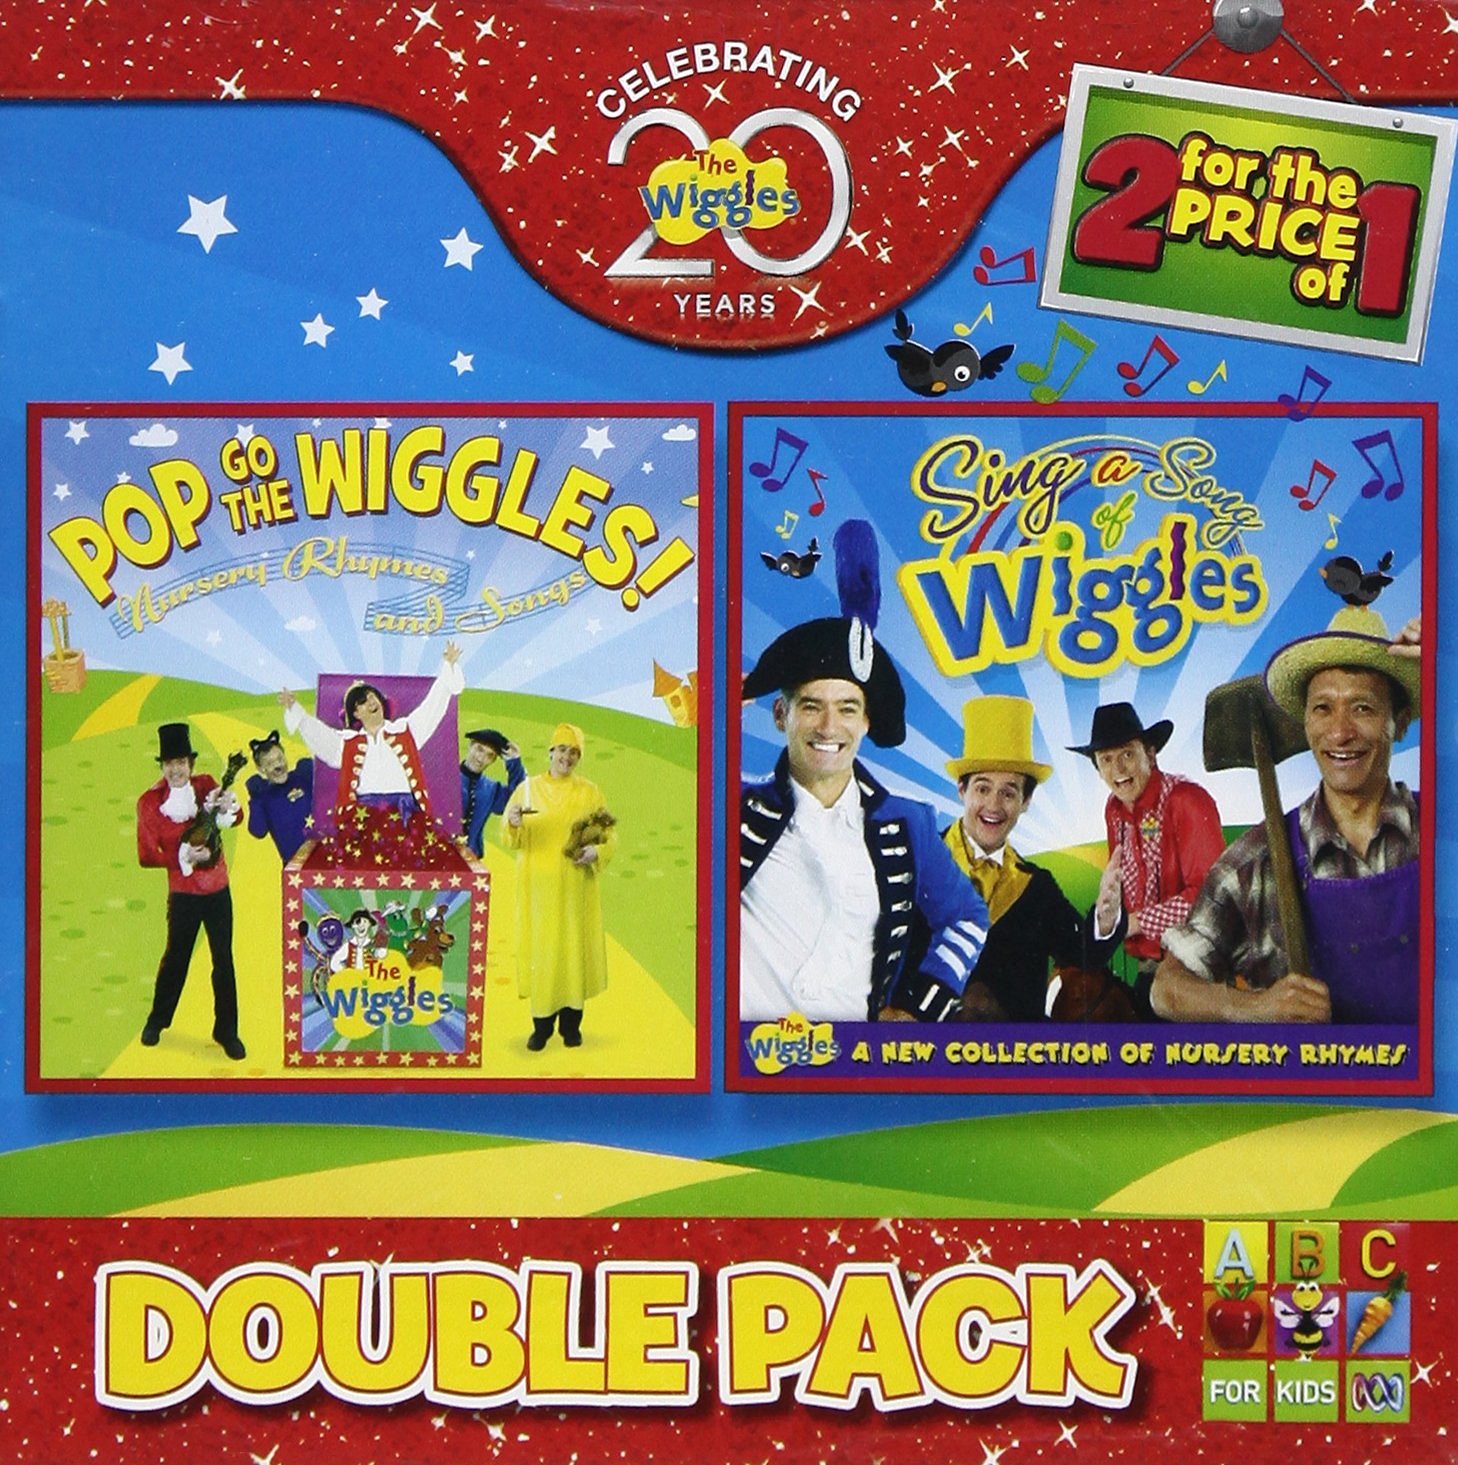 Wiggles DVD. The Wiggles Sing a Song of Wiggles DVD menu. The Wiggles getting strong. Rhymes music артисты